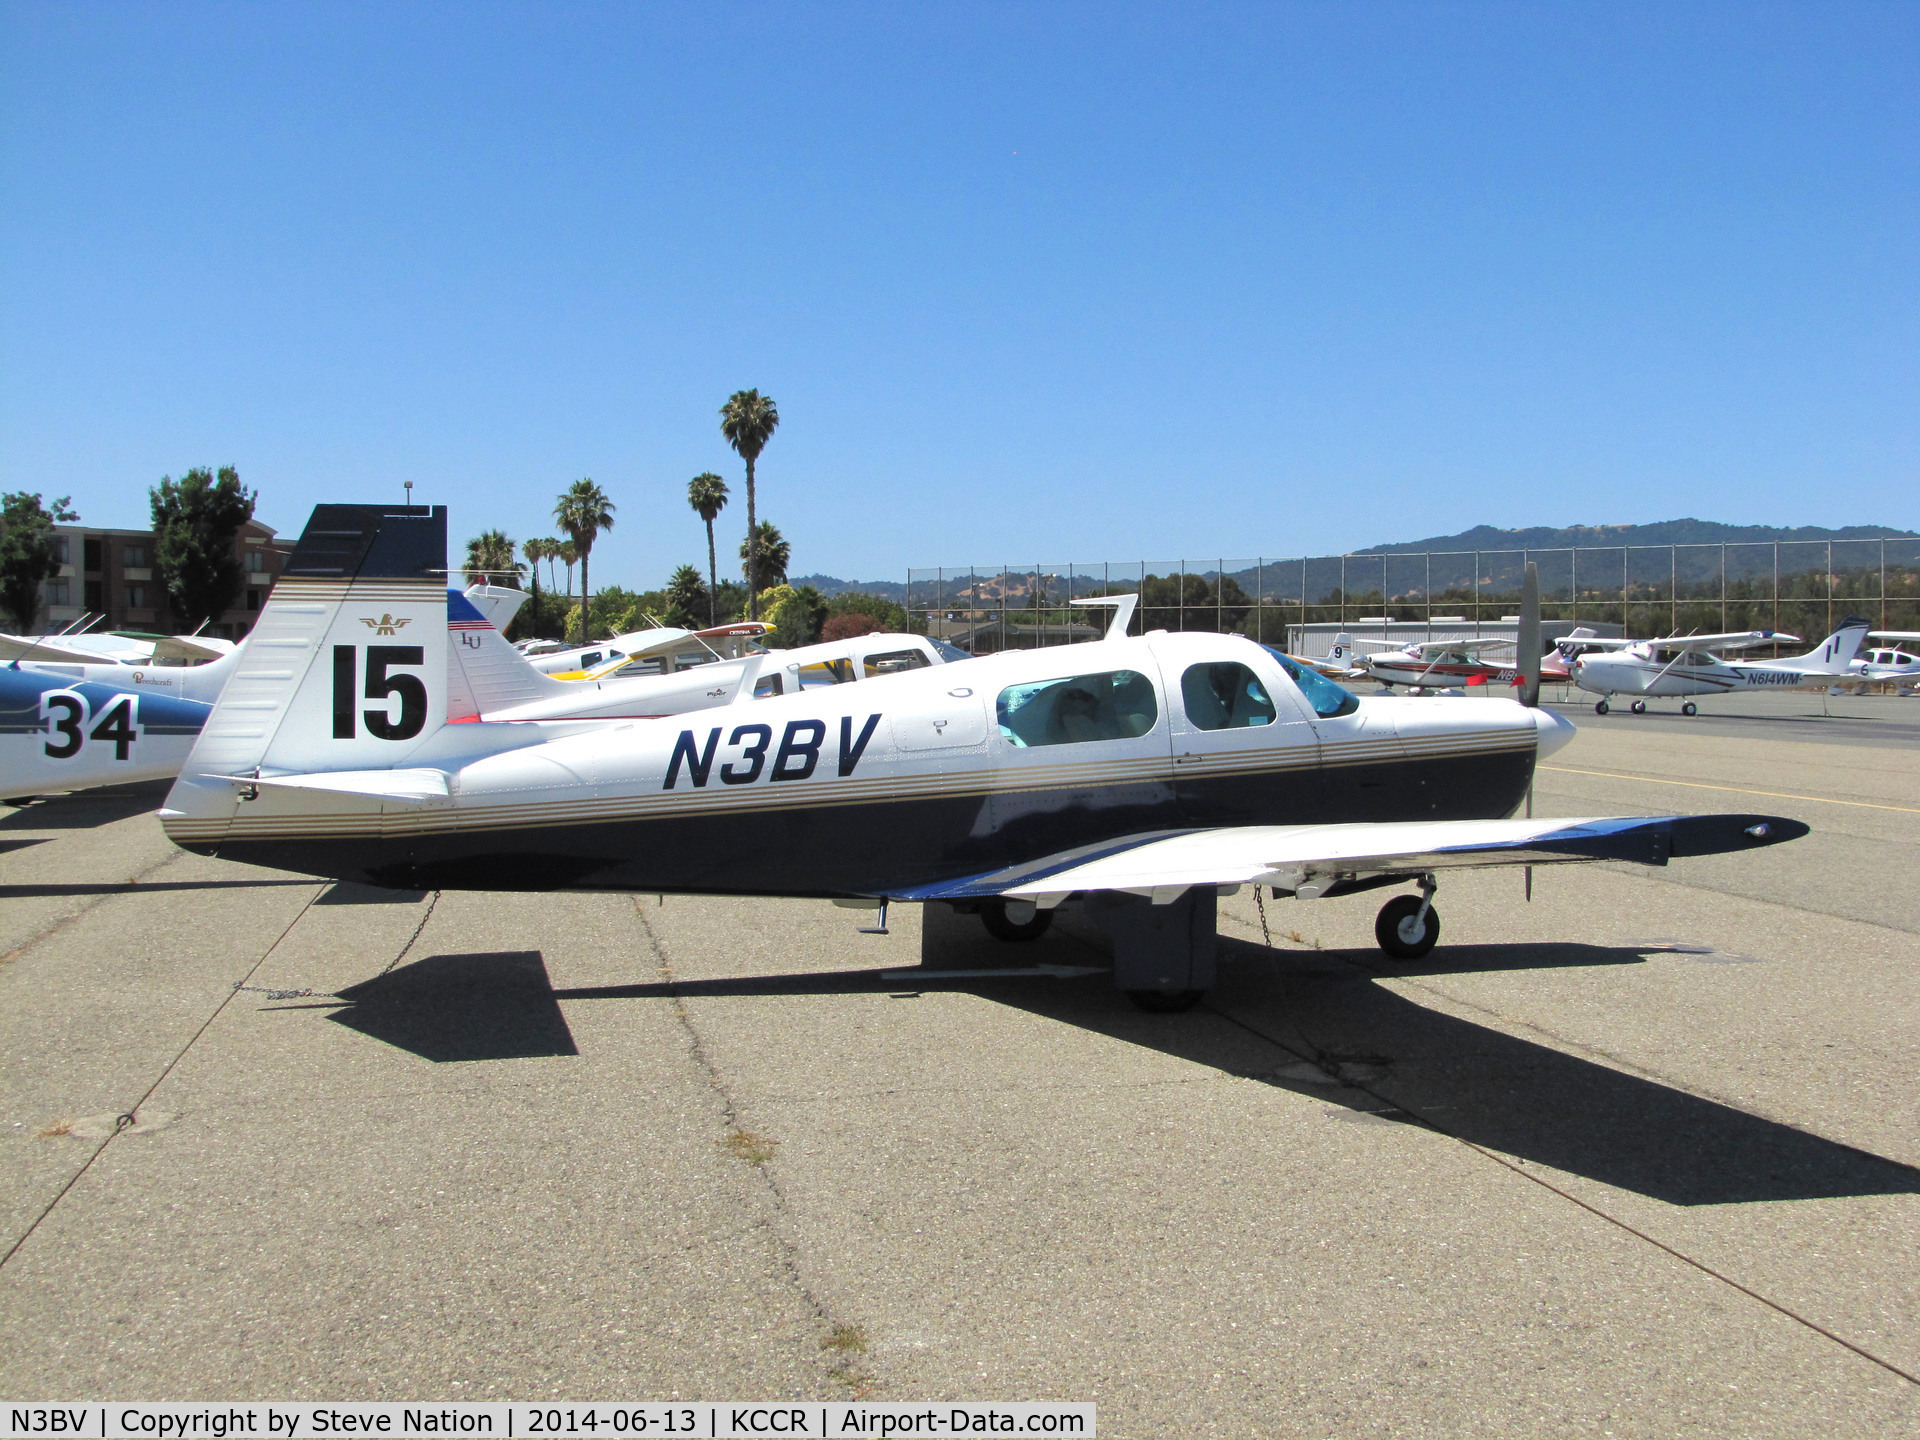 N3BV, 1975 Mooney M20F Executive C/N 22-1237, Pennsylvania-based 1975 Mooney M20F took part in 2014 Air Race Classic as Race #15. Photo @ Concord, CA prior to start of the cross country event. Pilots were Mary Wunder and Marilyn Patierno, aka 